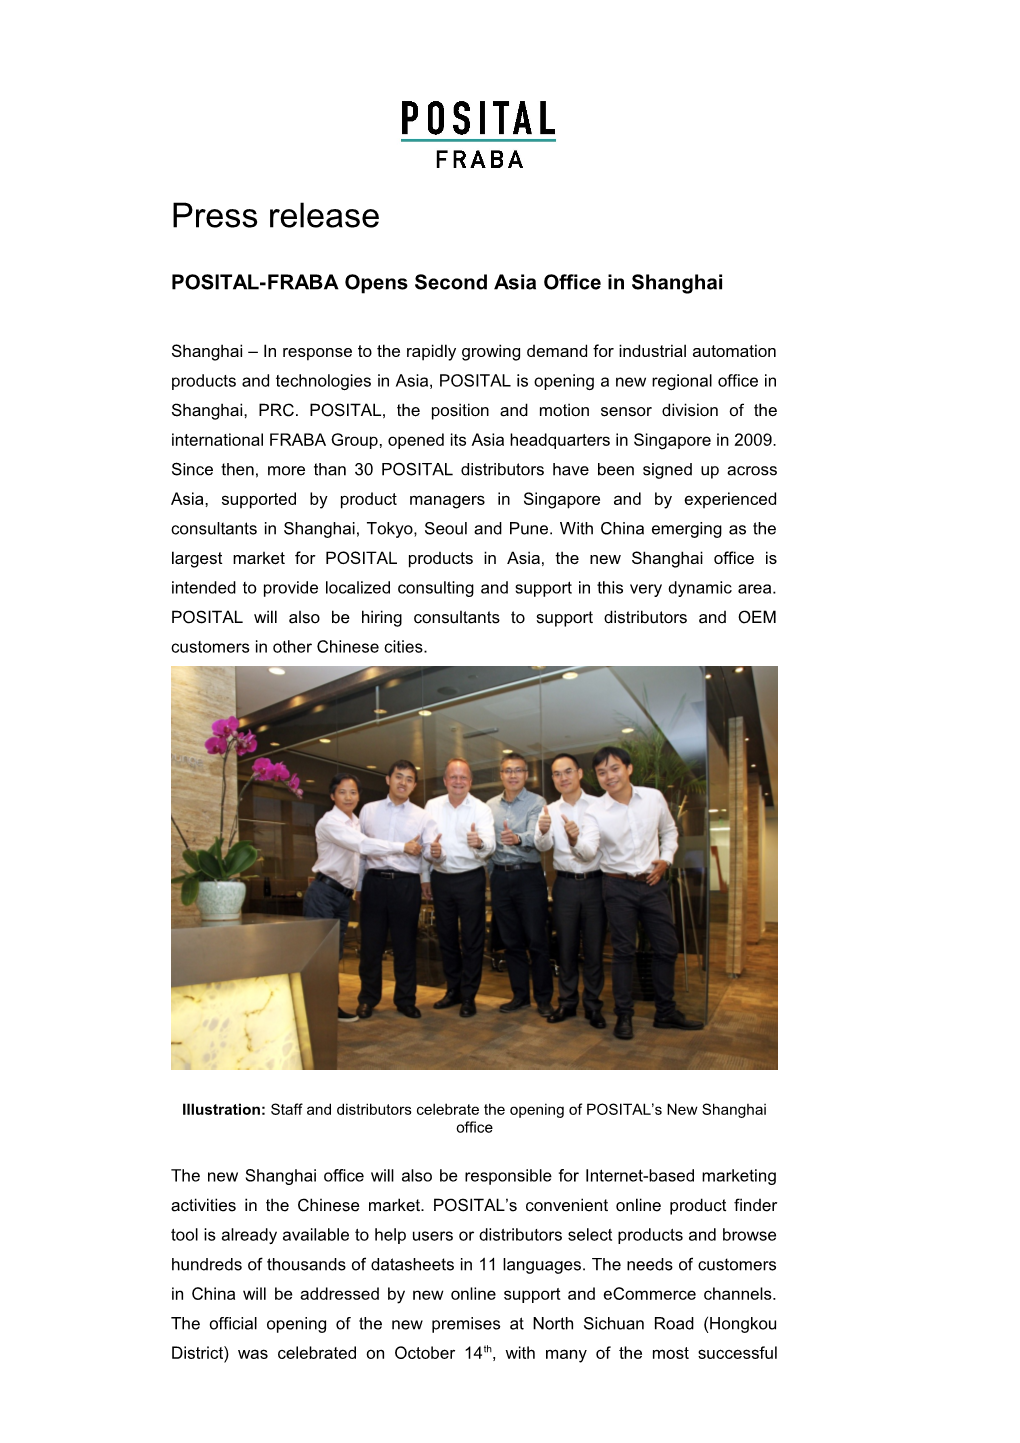 POSITAL-FRABA Opens Second Asia Office in Shanghai